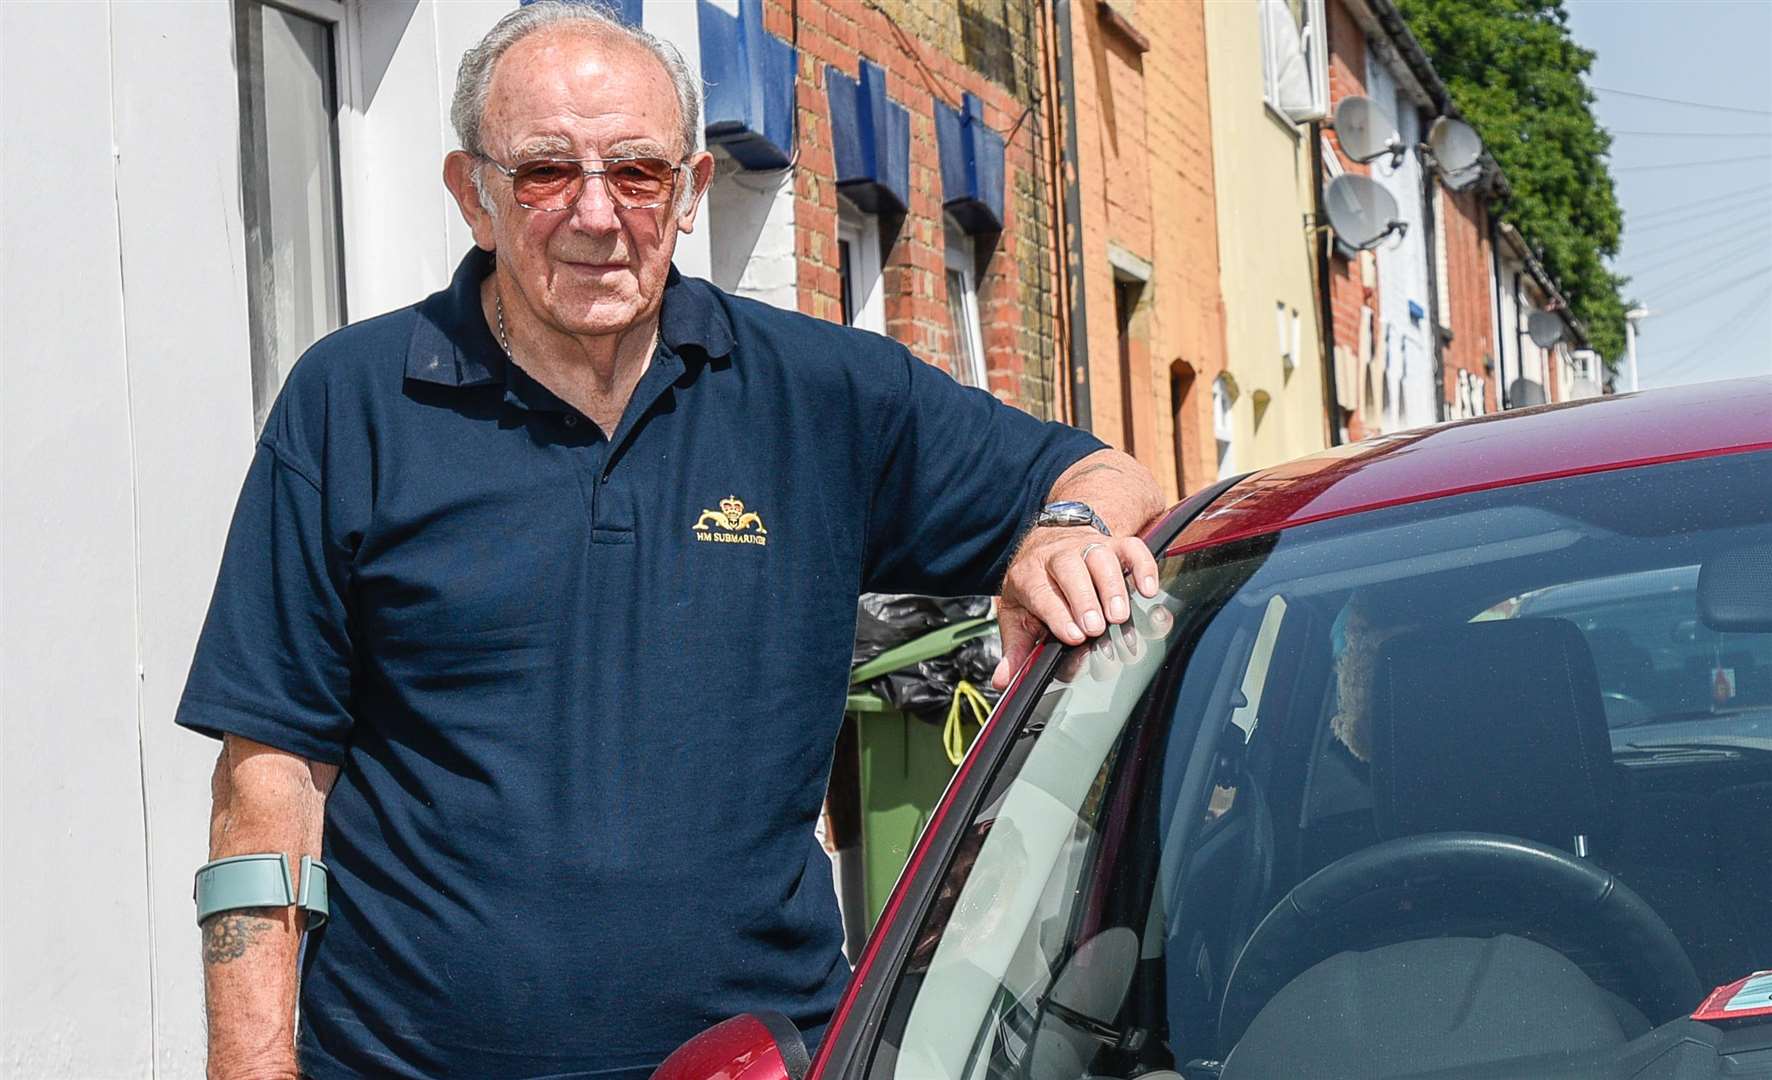 Peter Reeves has been fined by Smart Parking